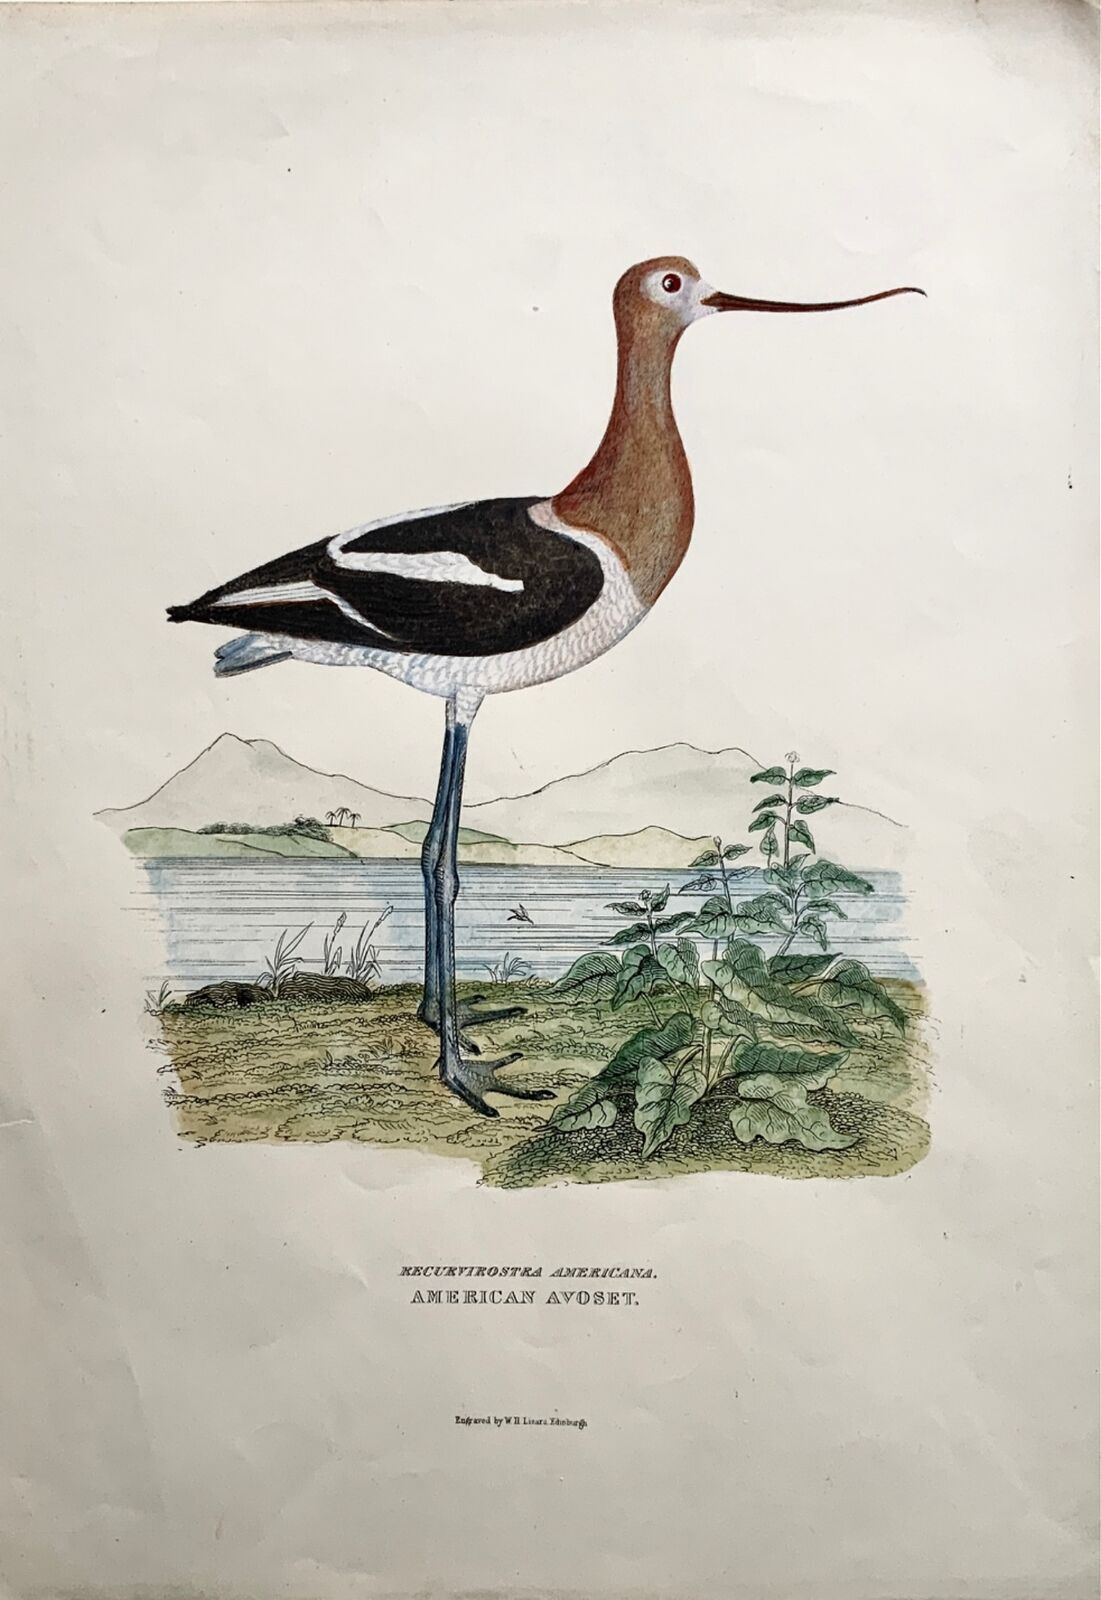 1846 American Avocet, ornithology, Cpt. Brown, hand coloured Large Folio (36cm)